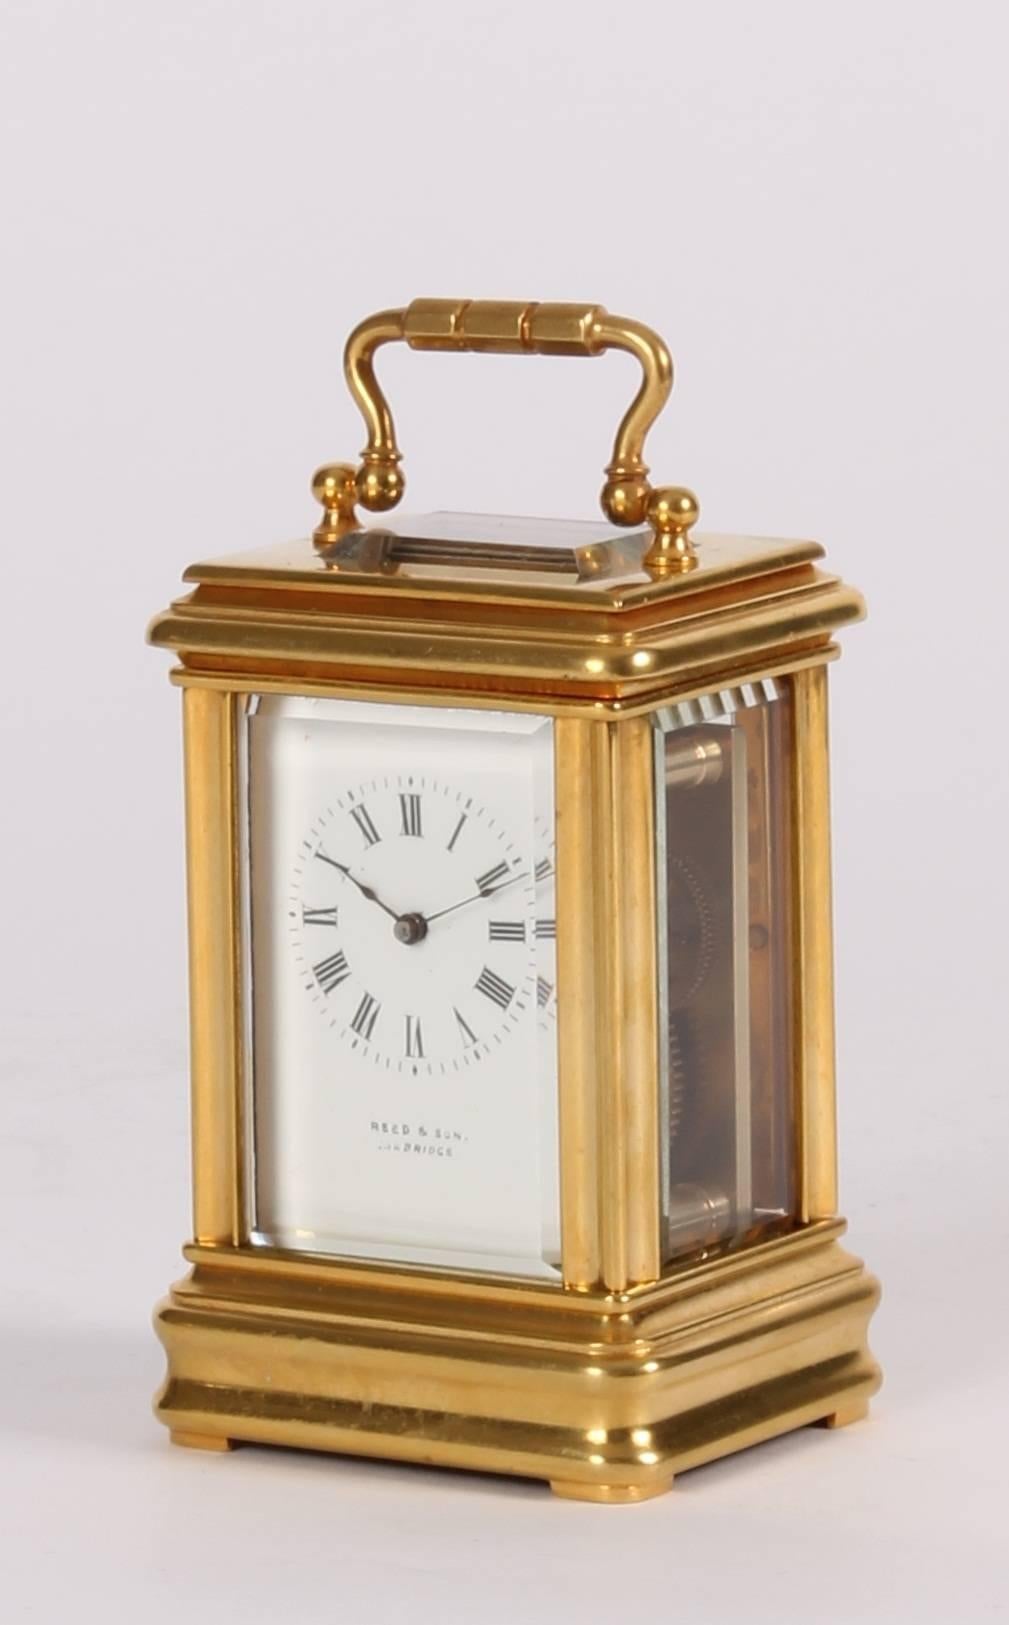 Retailed French miniature gilt brass timepiece, by Reed & Son, circa 1880.

3.5-cm enamel dial with Roman numerals and fine blued hands signed below for the retailer 'Reed & Son Cambridge', 8-day movement with platform cylinder escapement, moulded